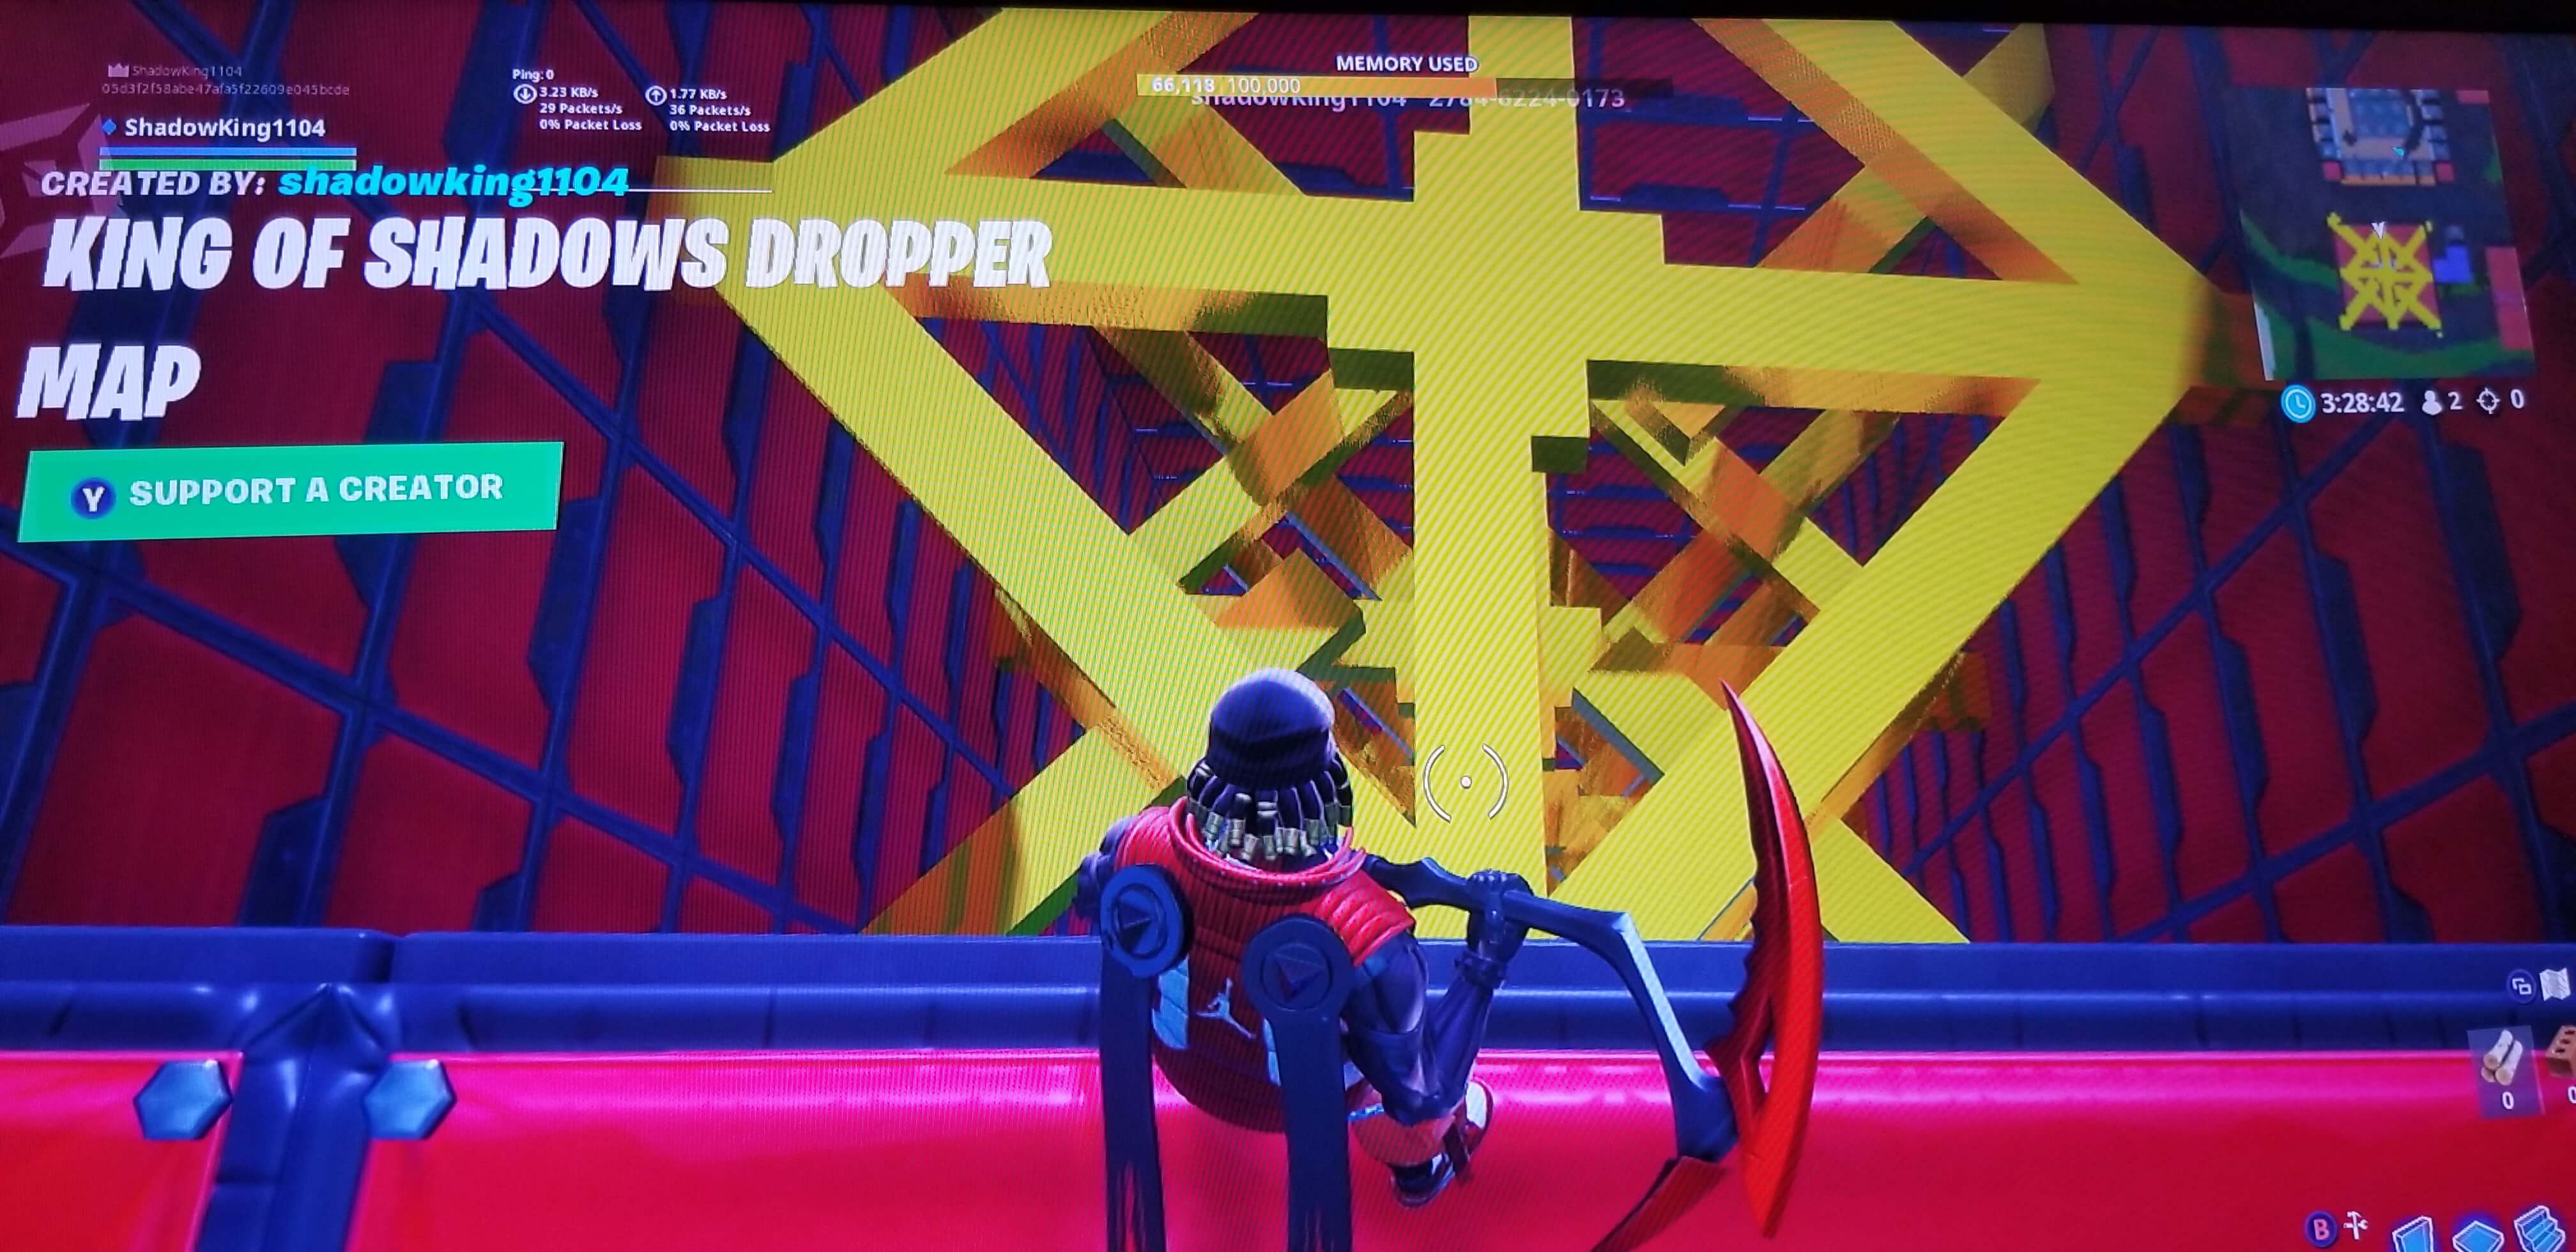 KING OF SHADOWS DROPPER MAP image 2